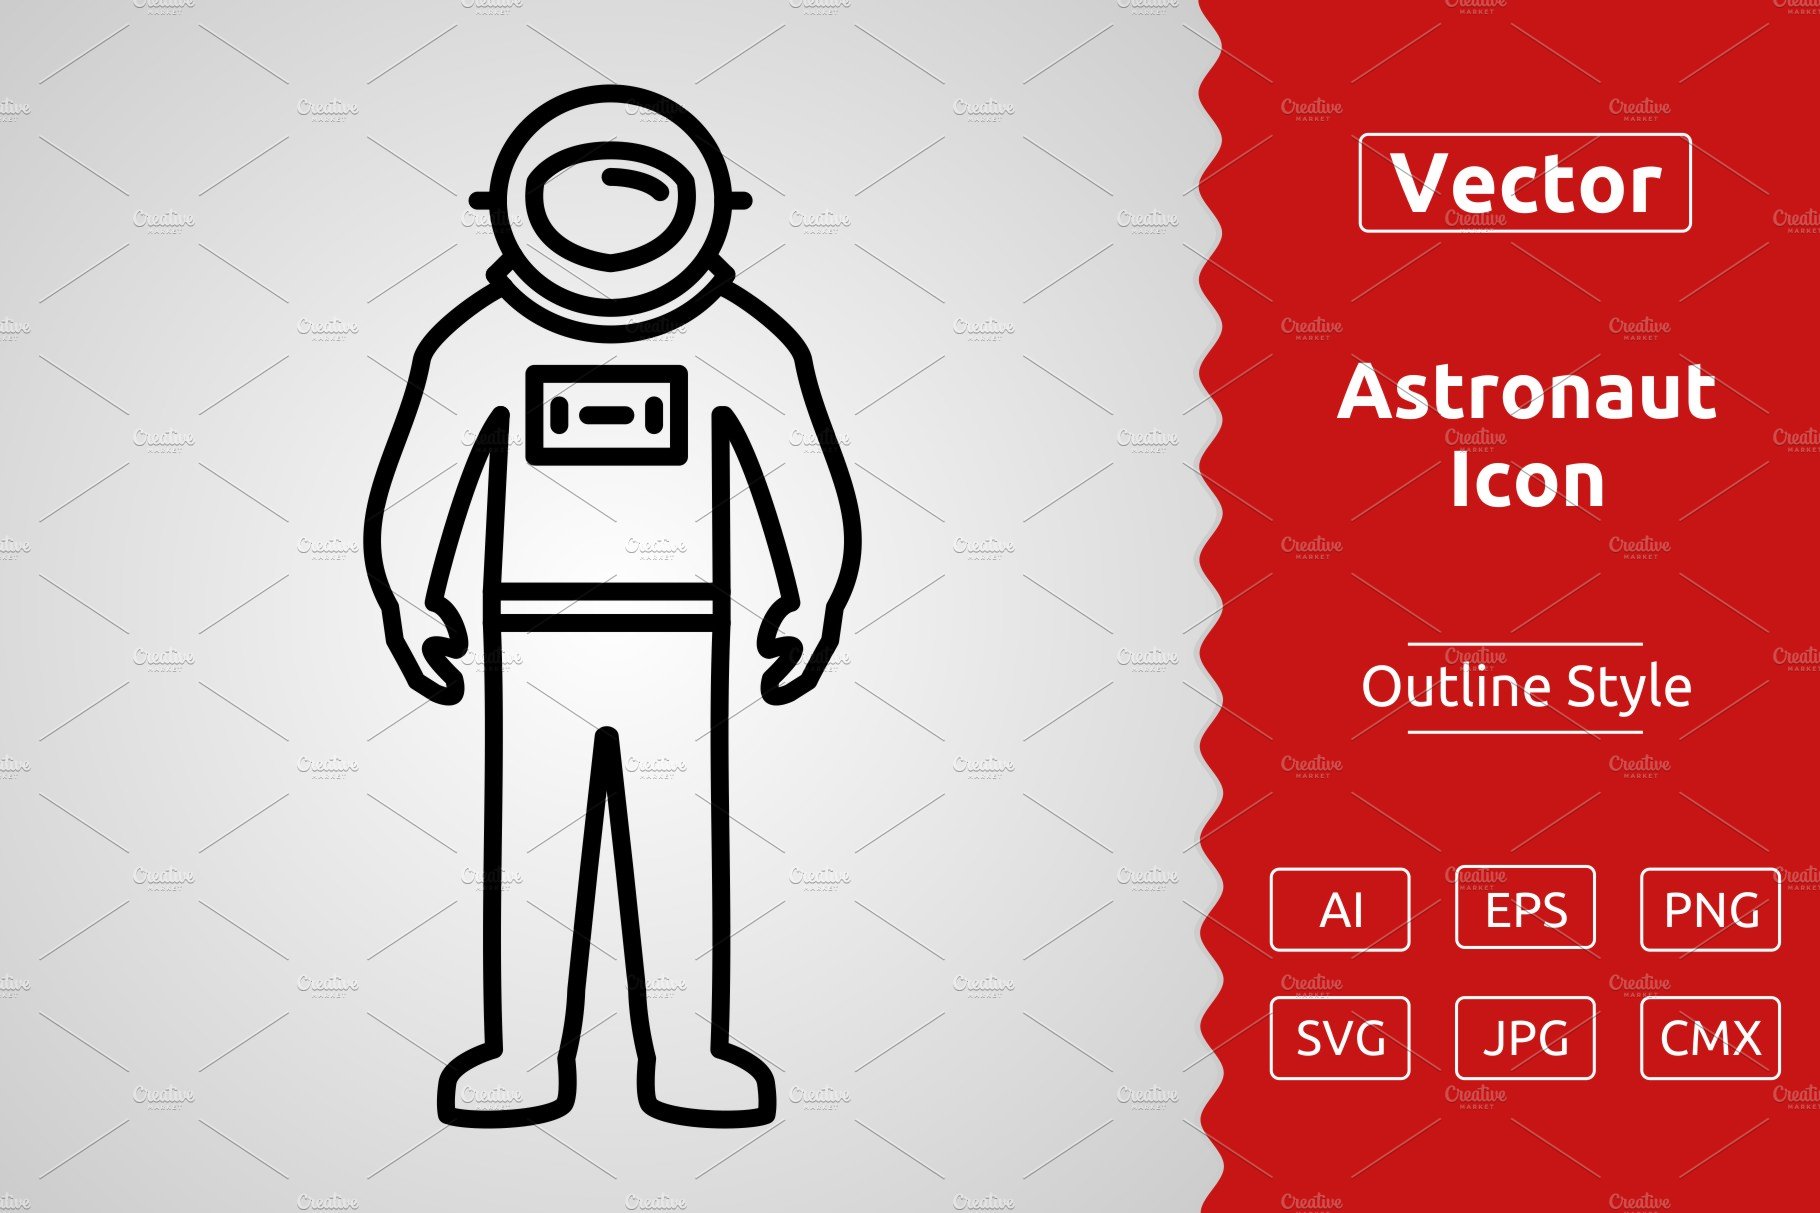 Vector Astronaut Outline Icon Design cover image.